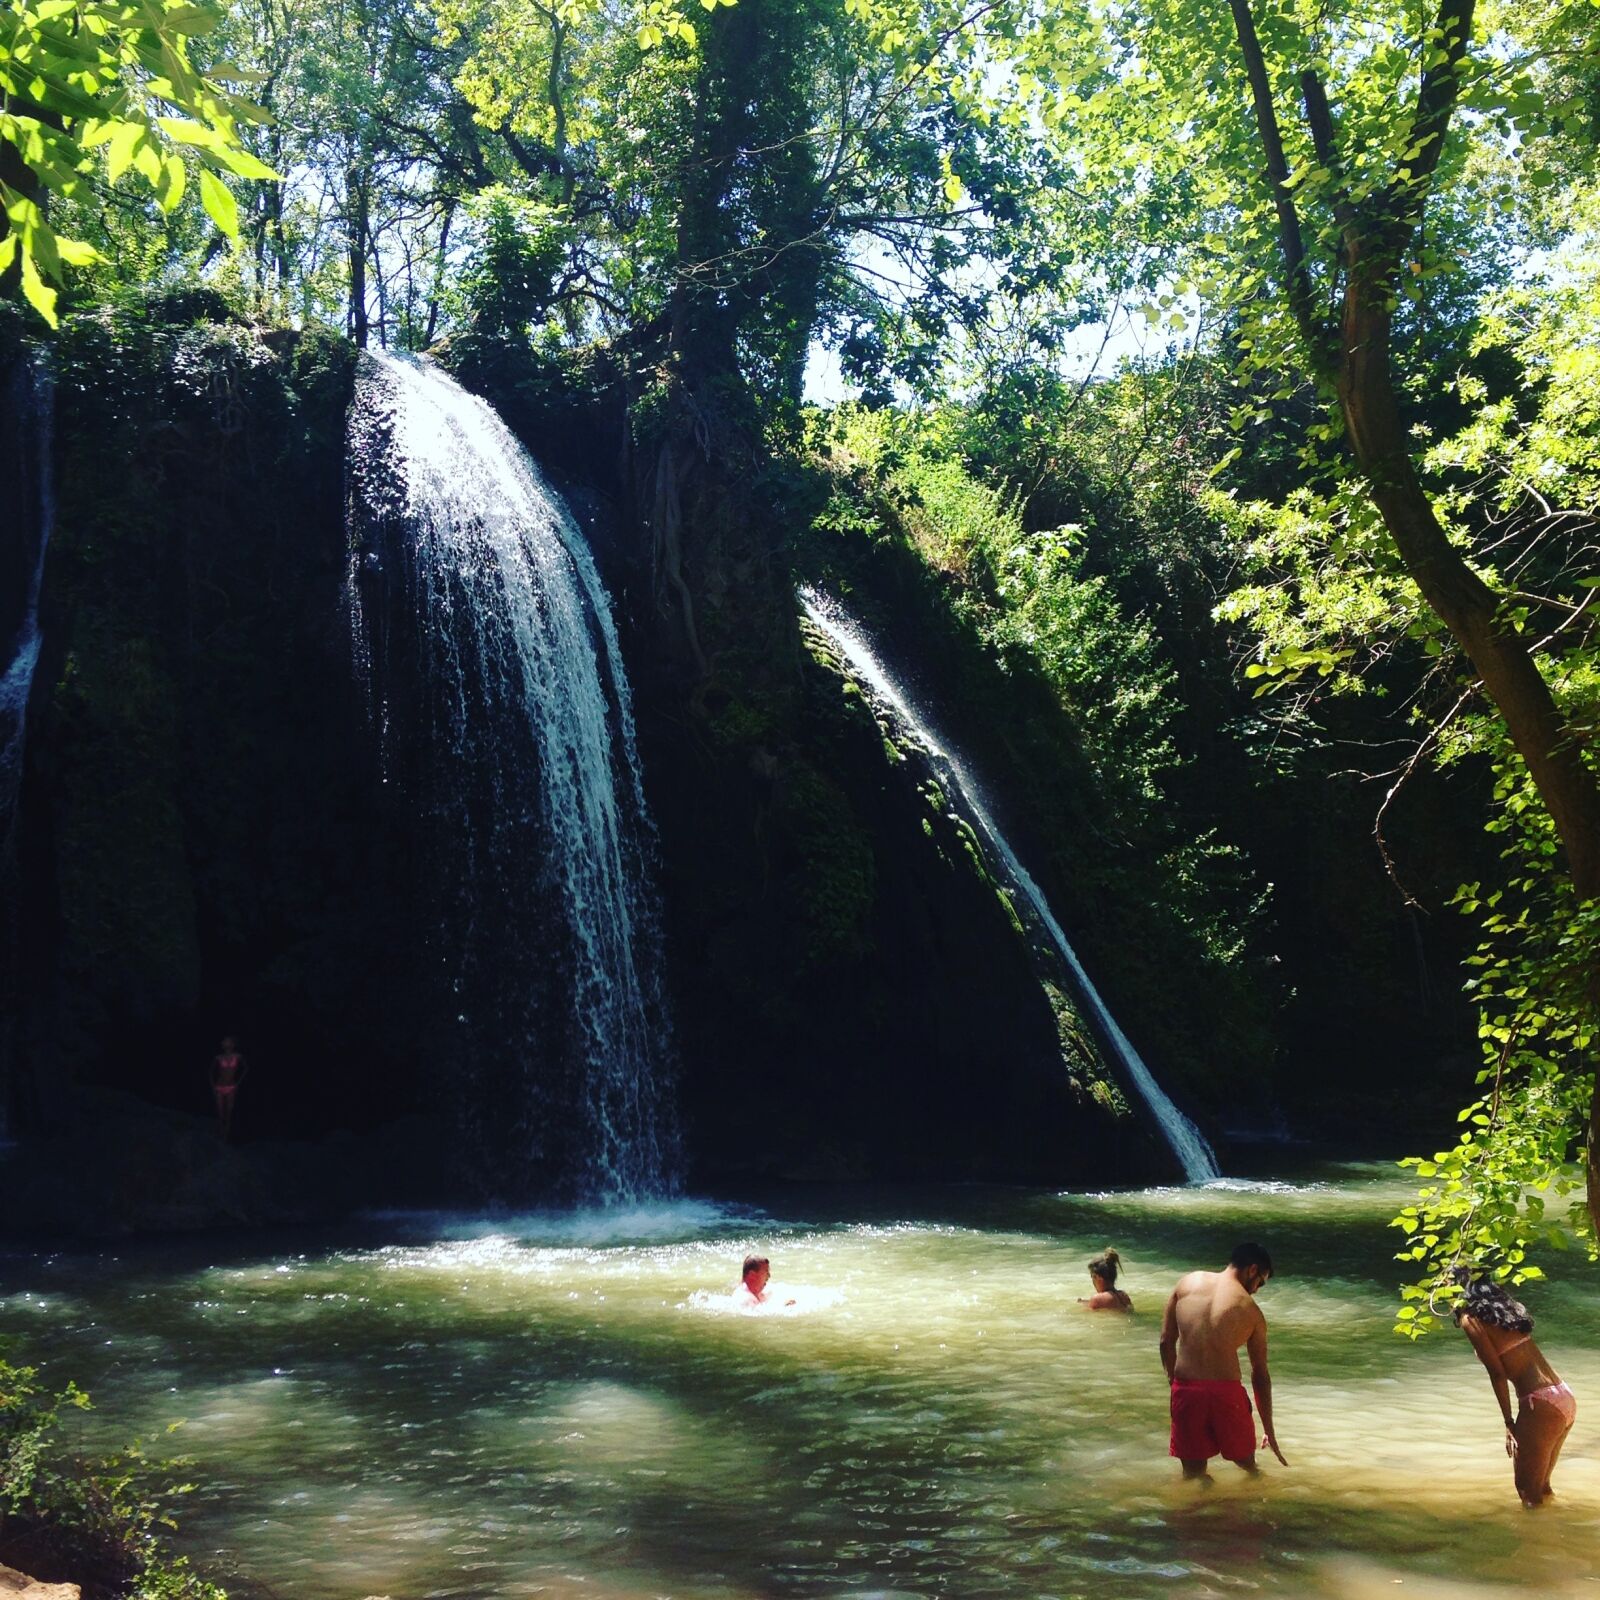 Apple iPhone 5c sample photo. Waterfall, france, nature photography